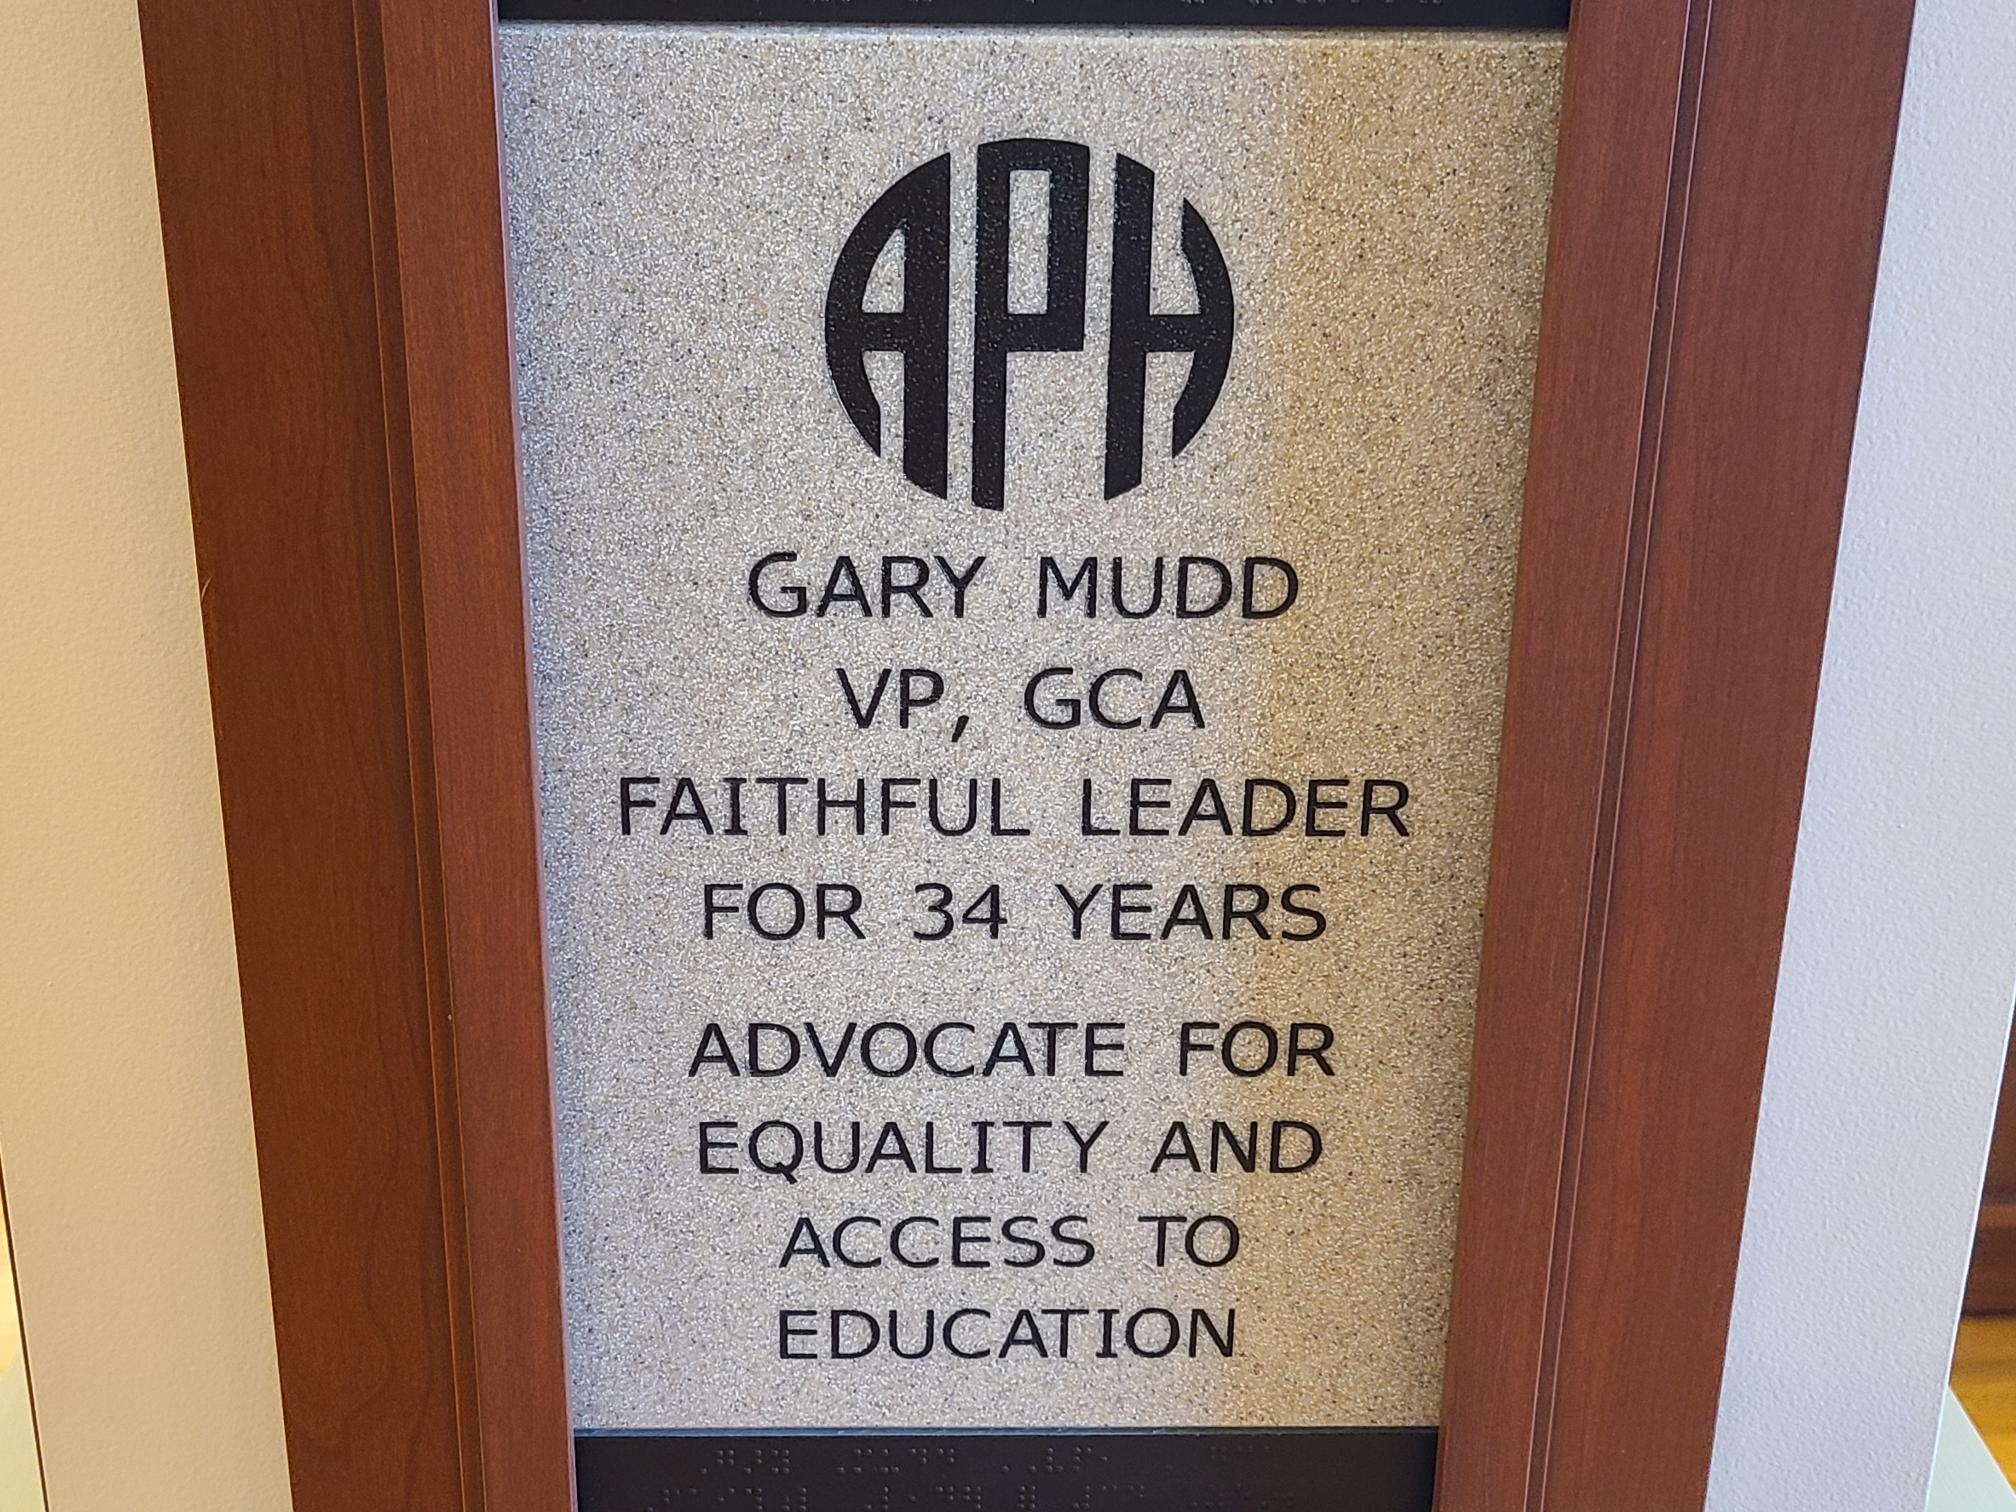 Gary Mudd VP, CGA, Faithful Leader for 34 Years, Advocate for Equality and Access to Education